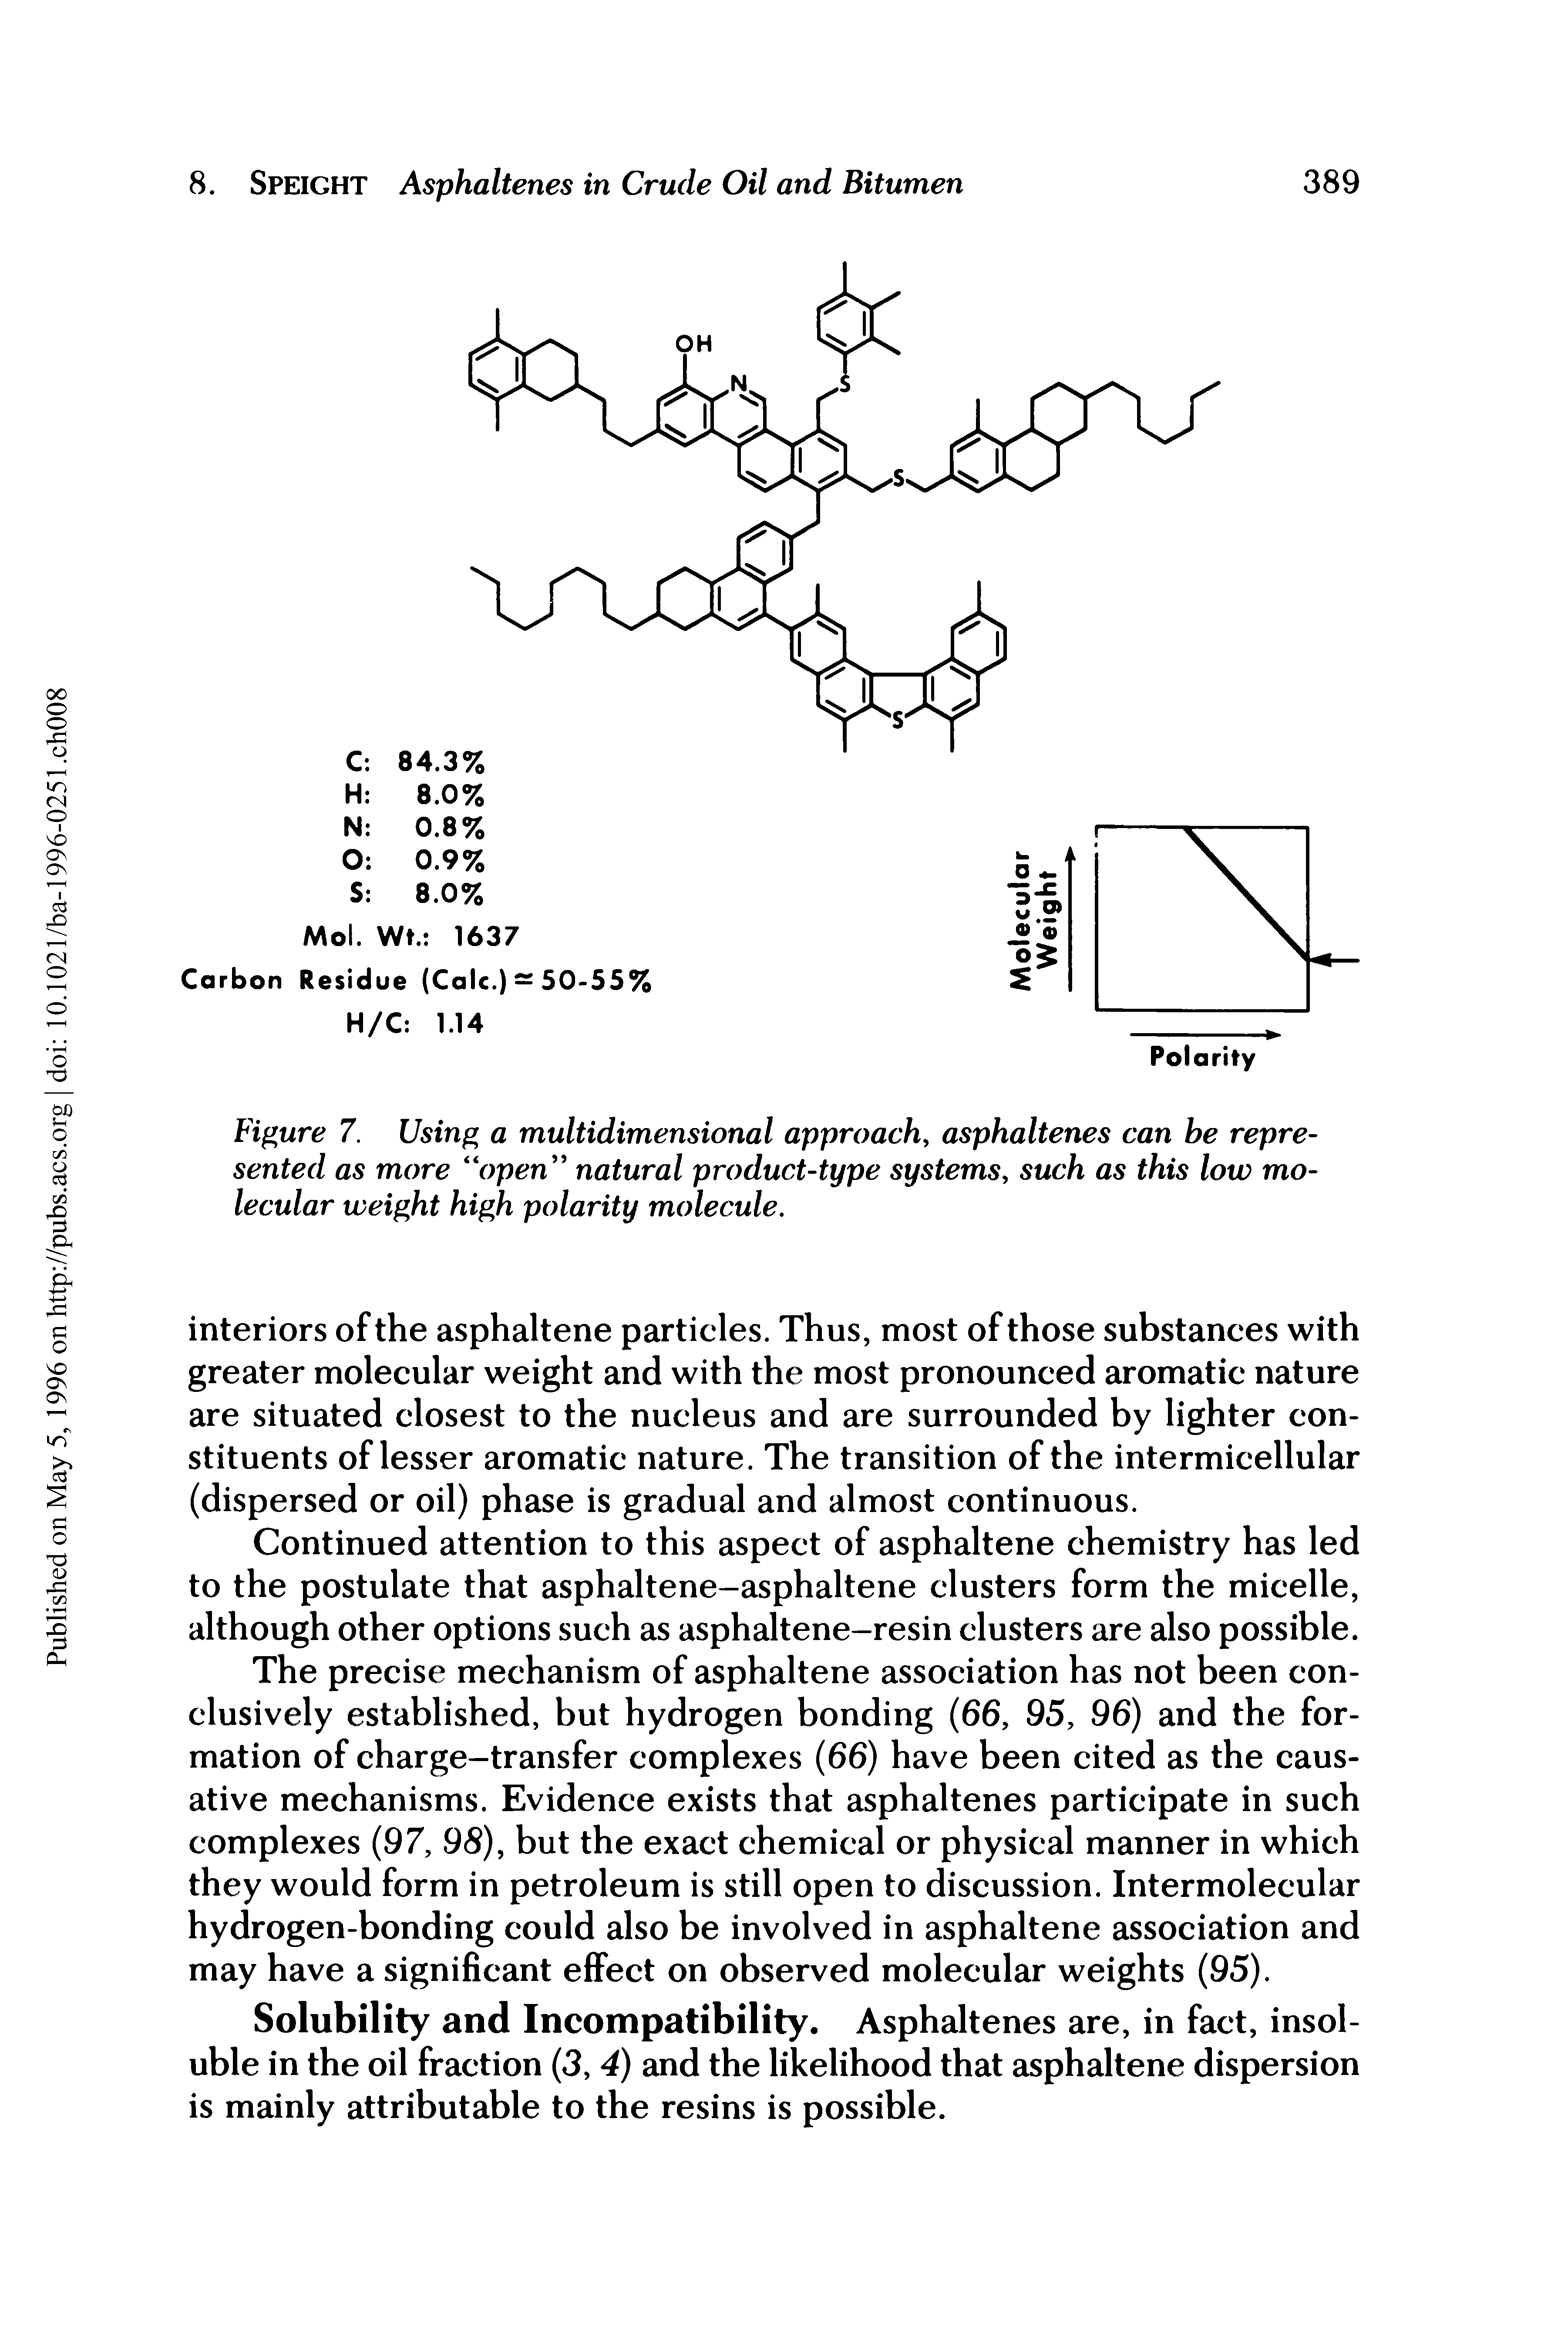 Figure 7. Using a multidimensional approach, asphaltenes can be represented as more open natural product-type systems, such as this low molecular weight high polarity molecule.